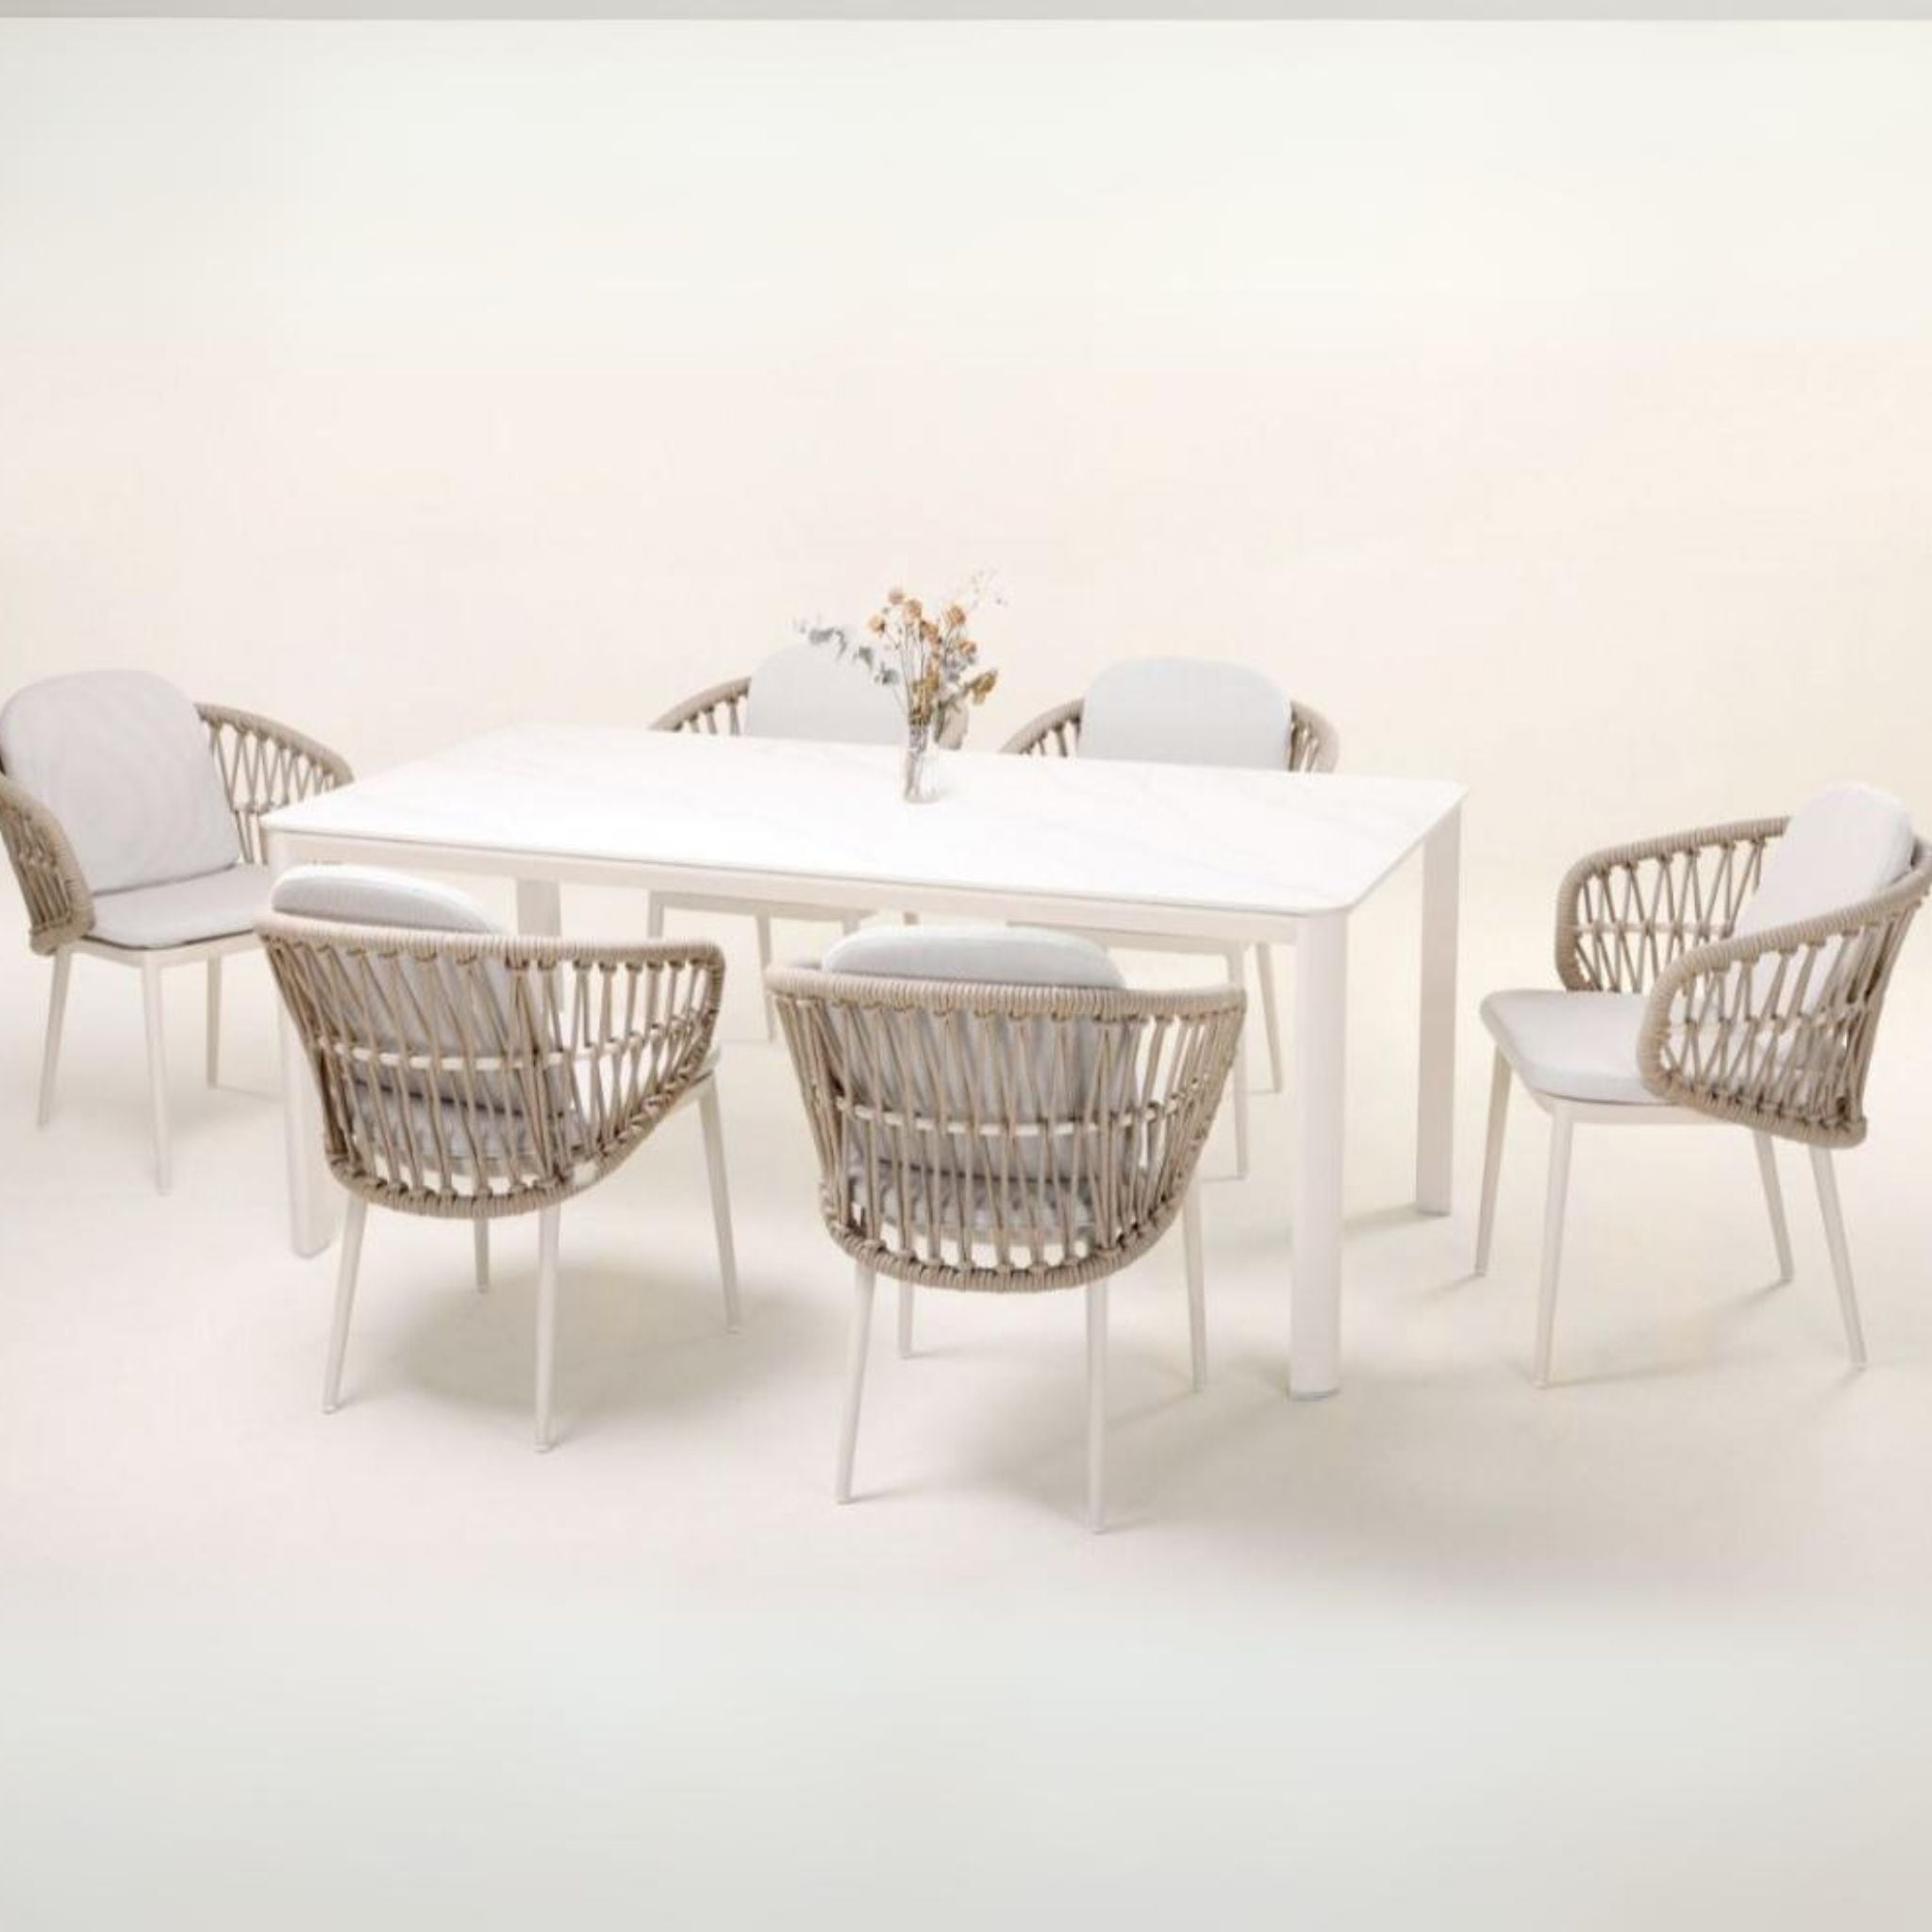 Crisal Decoracion Violet-4 Outdoor Table White Aluminum and Stone - ModernistaLiving